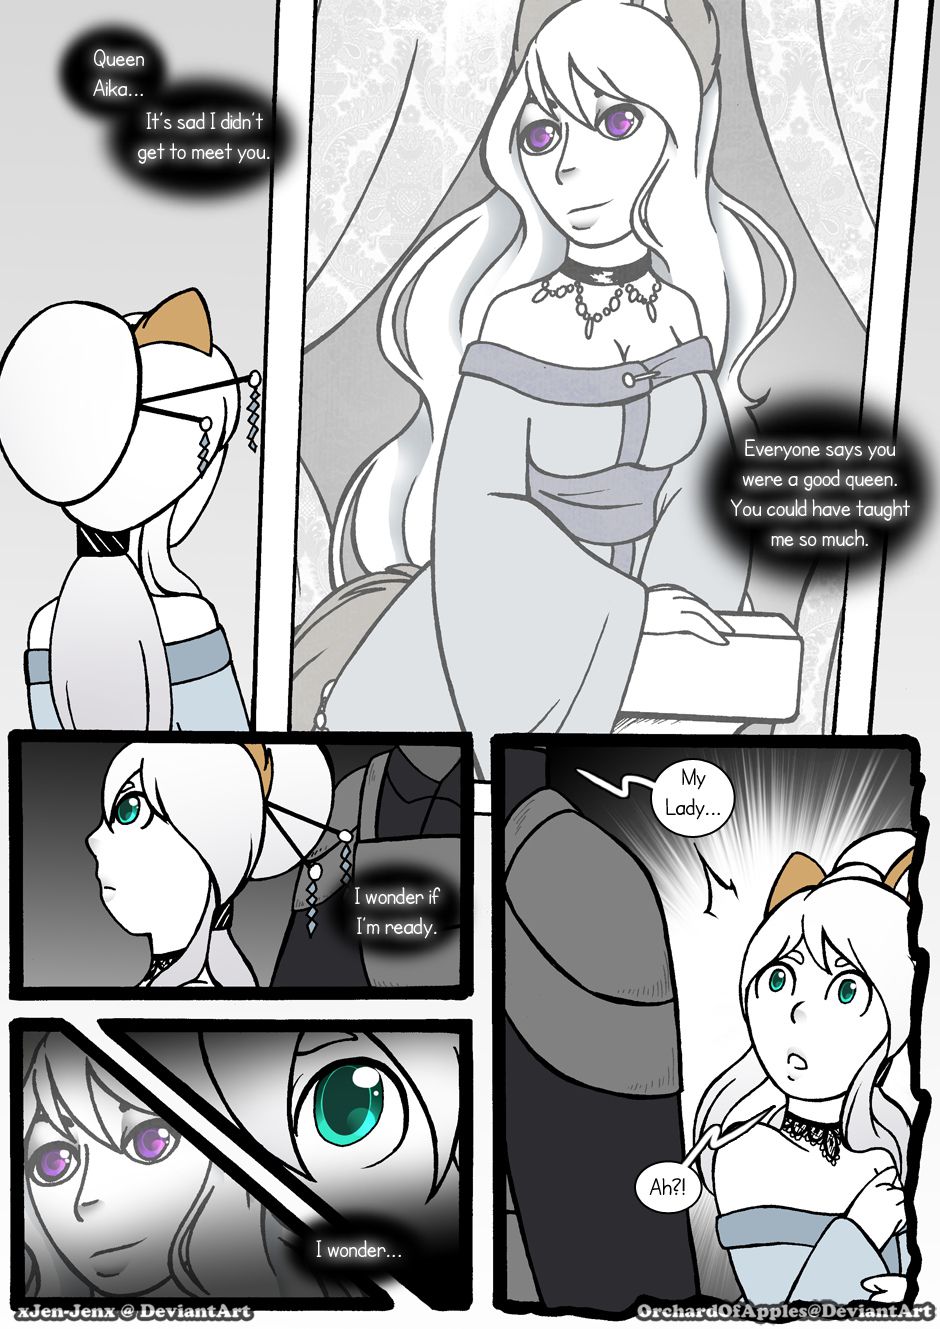 [Jeny-jen94] Between Kings and Queens [Ongoing] 199